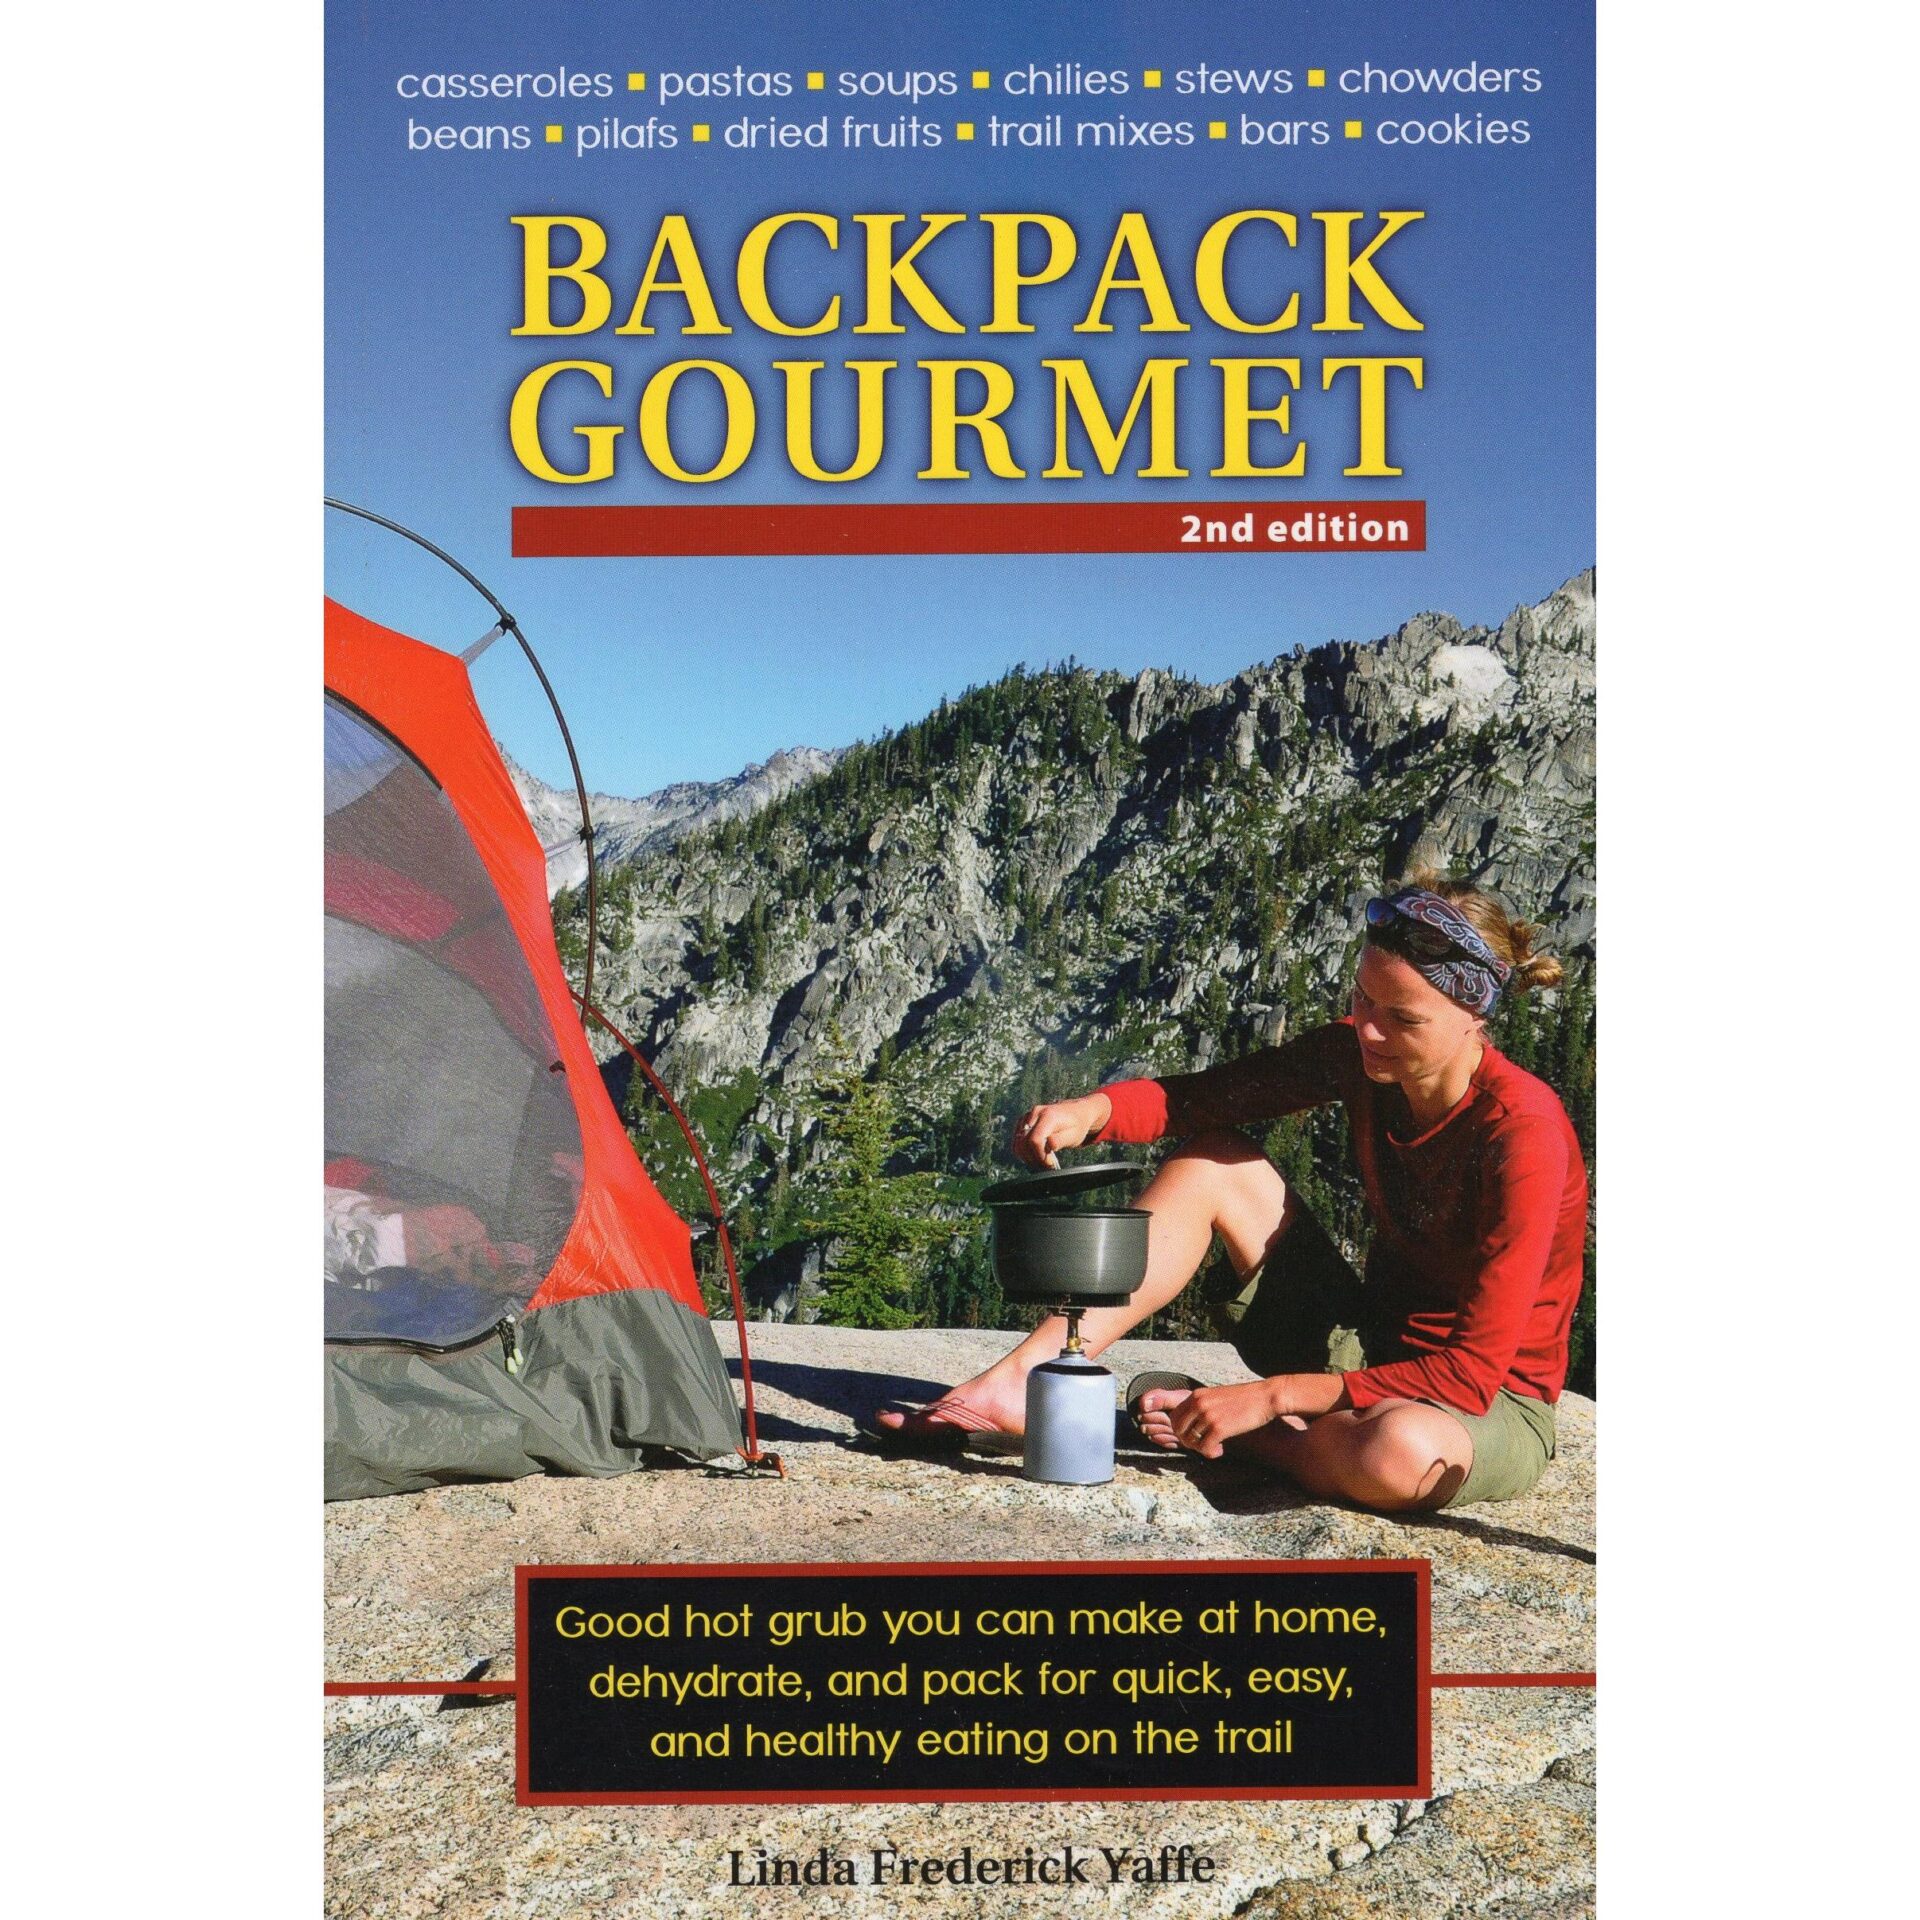 Backpack Gourmet: Good Hot Grub You Can Make at Home